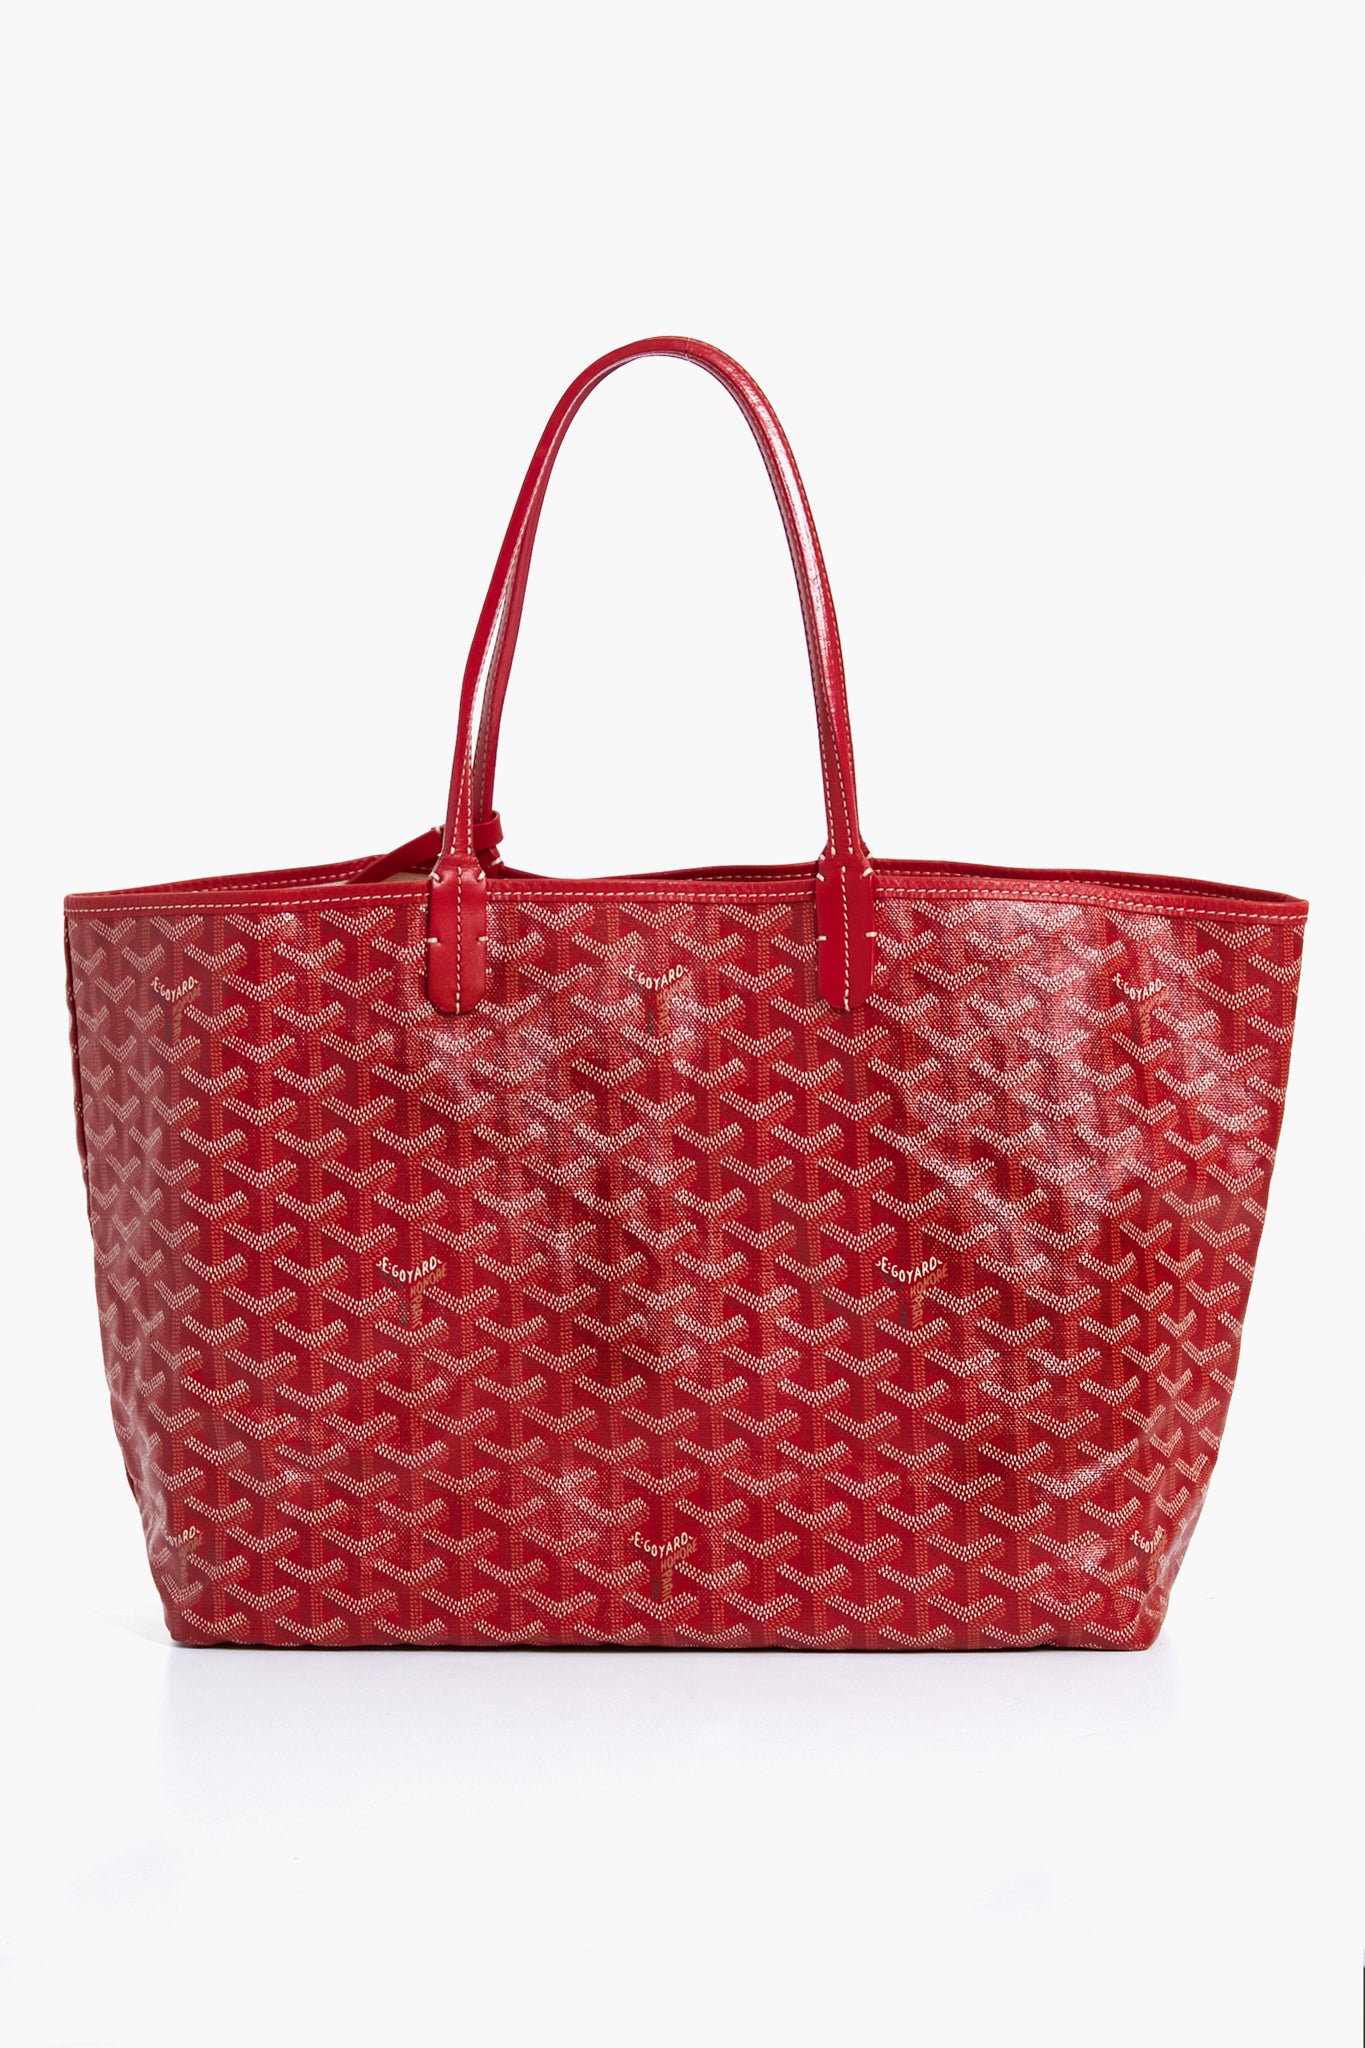 CLOSED* Authenticate This GOYARD, Page 186